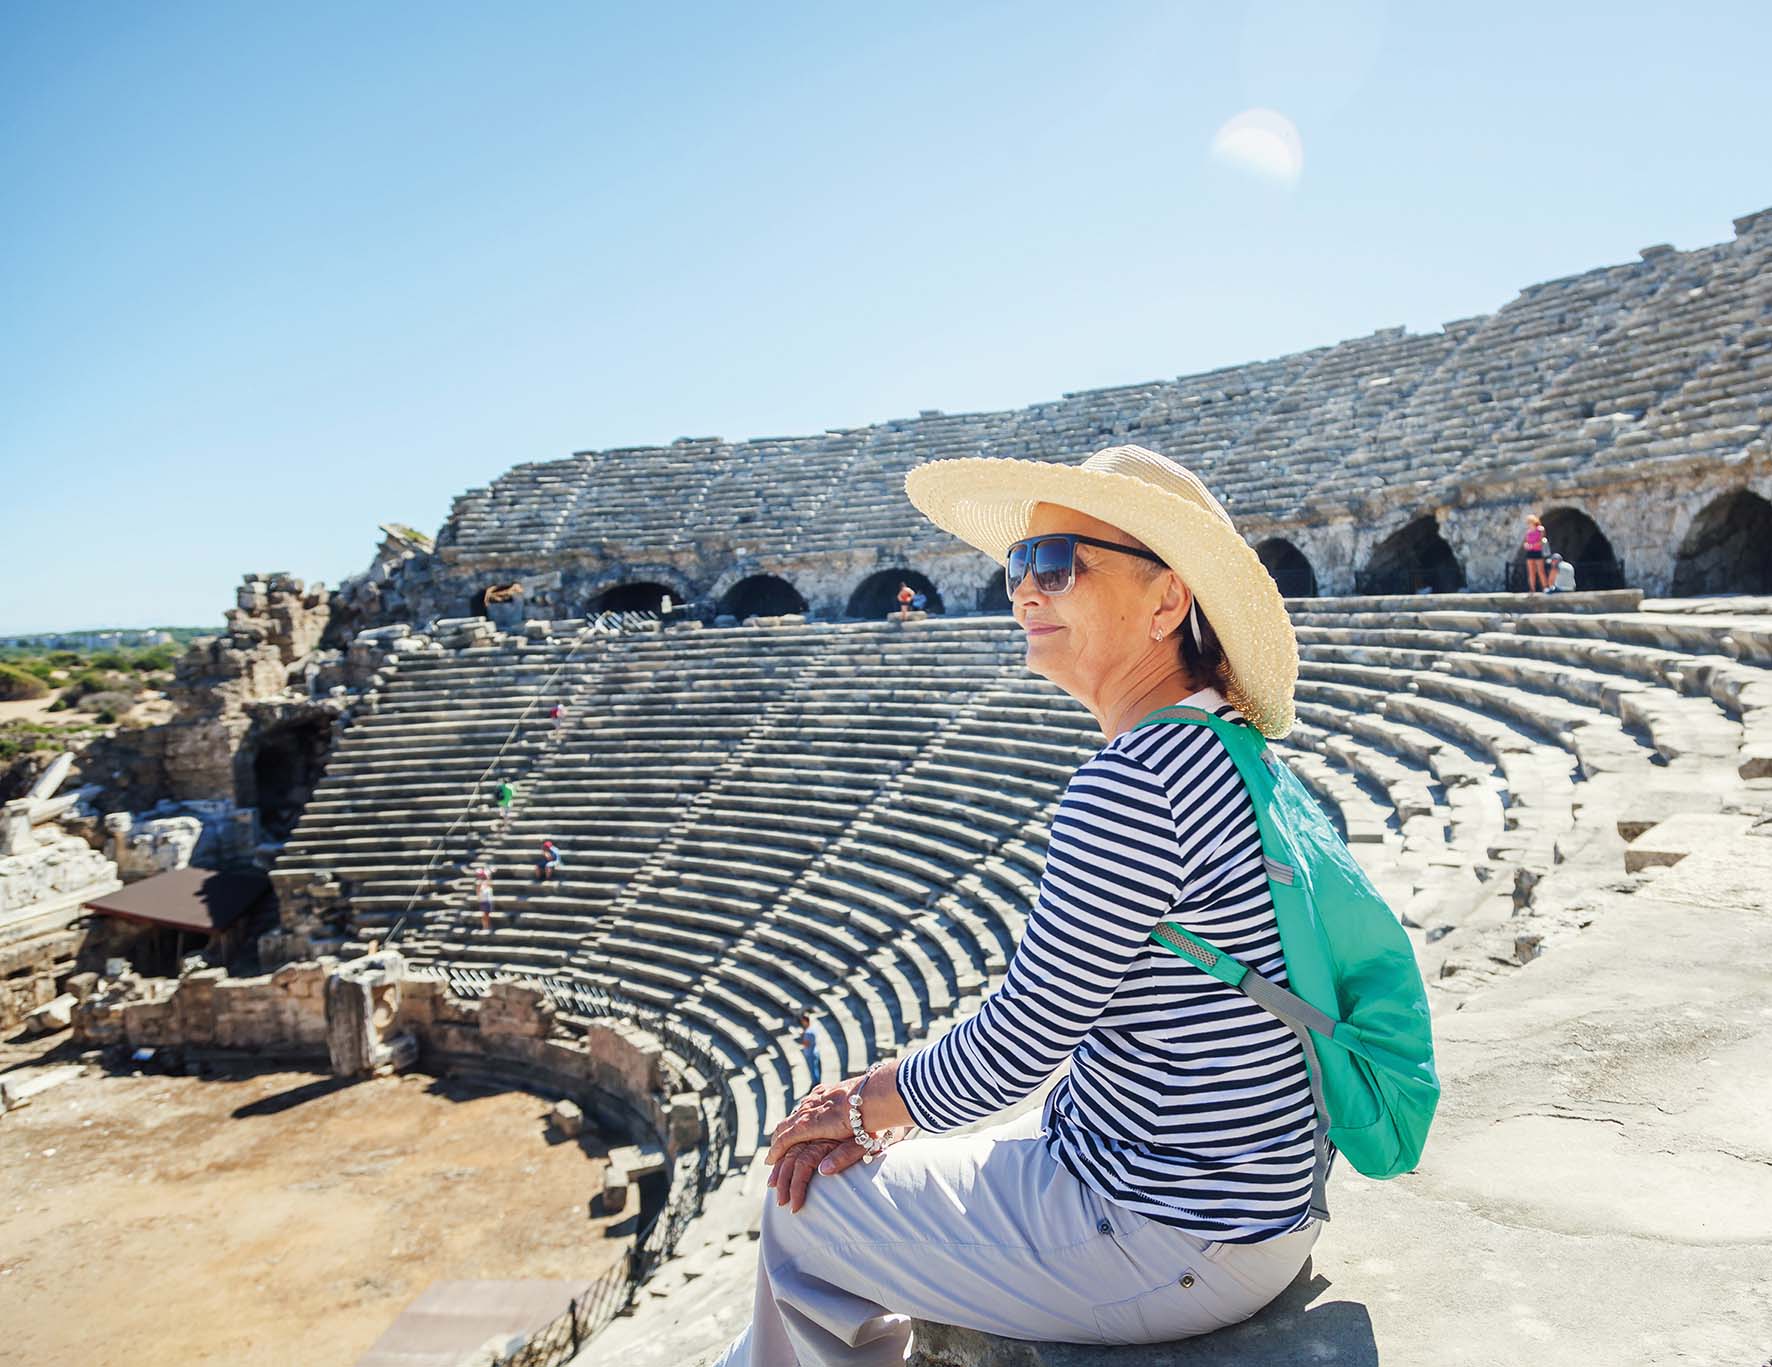 Mature beautiful woman traveler, sits on the steps of the amphitheater in admiring the view. Travel to Greece and Turkey, the monuments of ancient architecture, active seniors; Shutterstock ID 1018392475; purchase_order: HL0022871; job: SE Image collection download; client: Client STG; other: Holidays